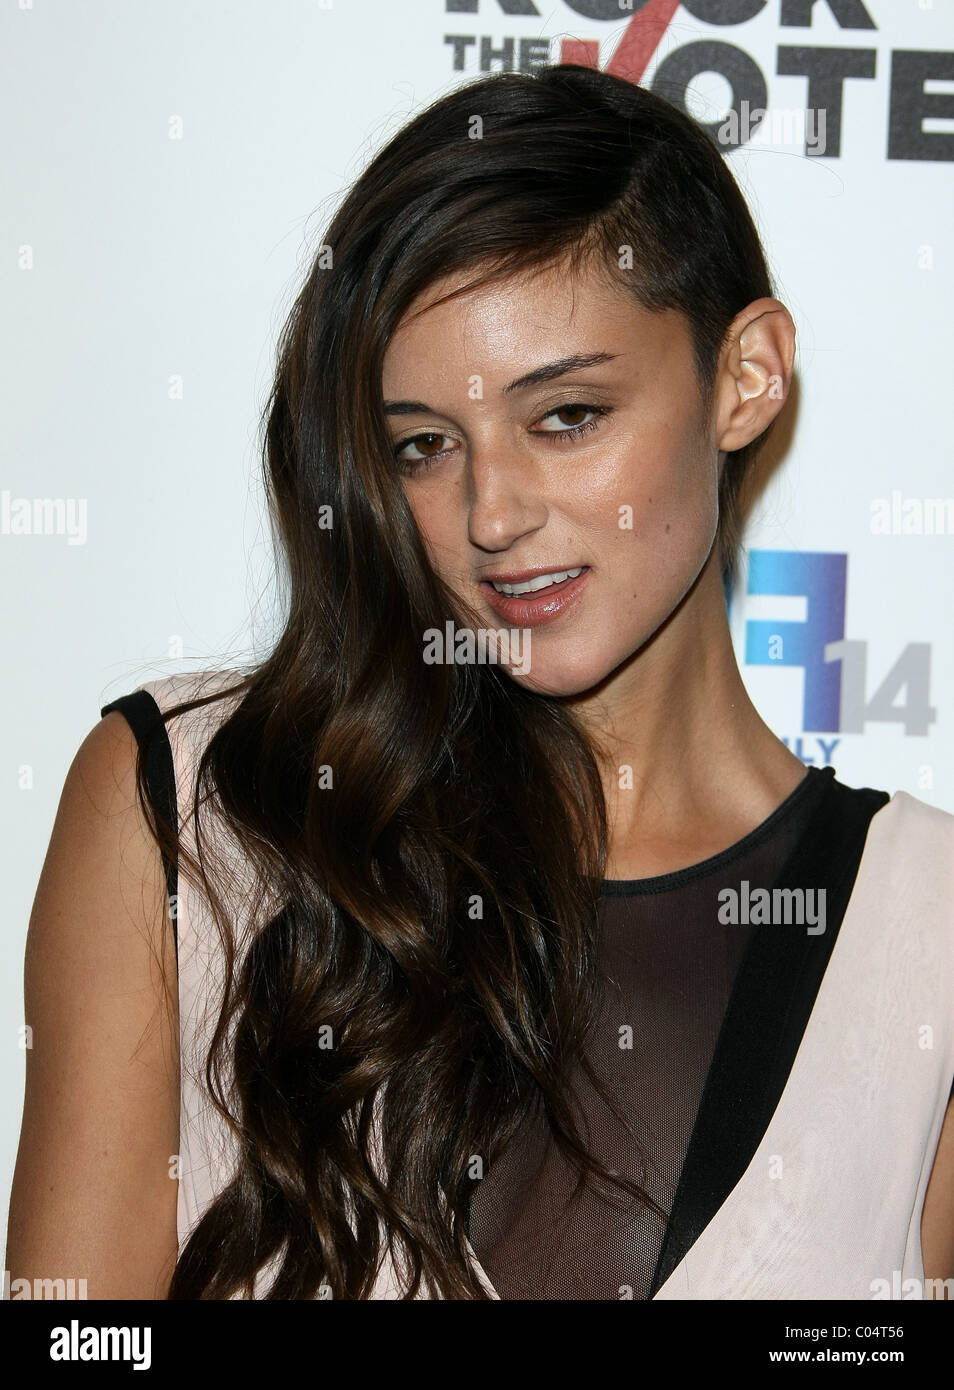 CAROLINE D'AMORE FRIENDS N FAMILY 14TH ANNUAL PRE GRAMMY EVENT HOLLYWOOD LOS ANGELES CALIFORNIA USA 11 February 2011 Stock Photo